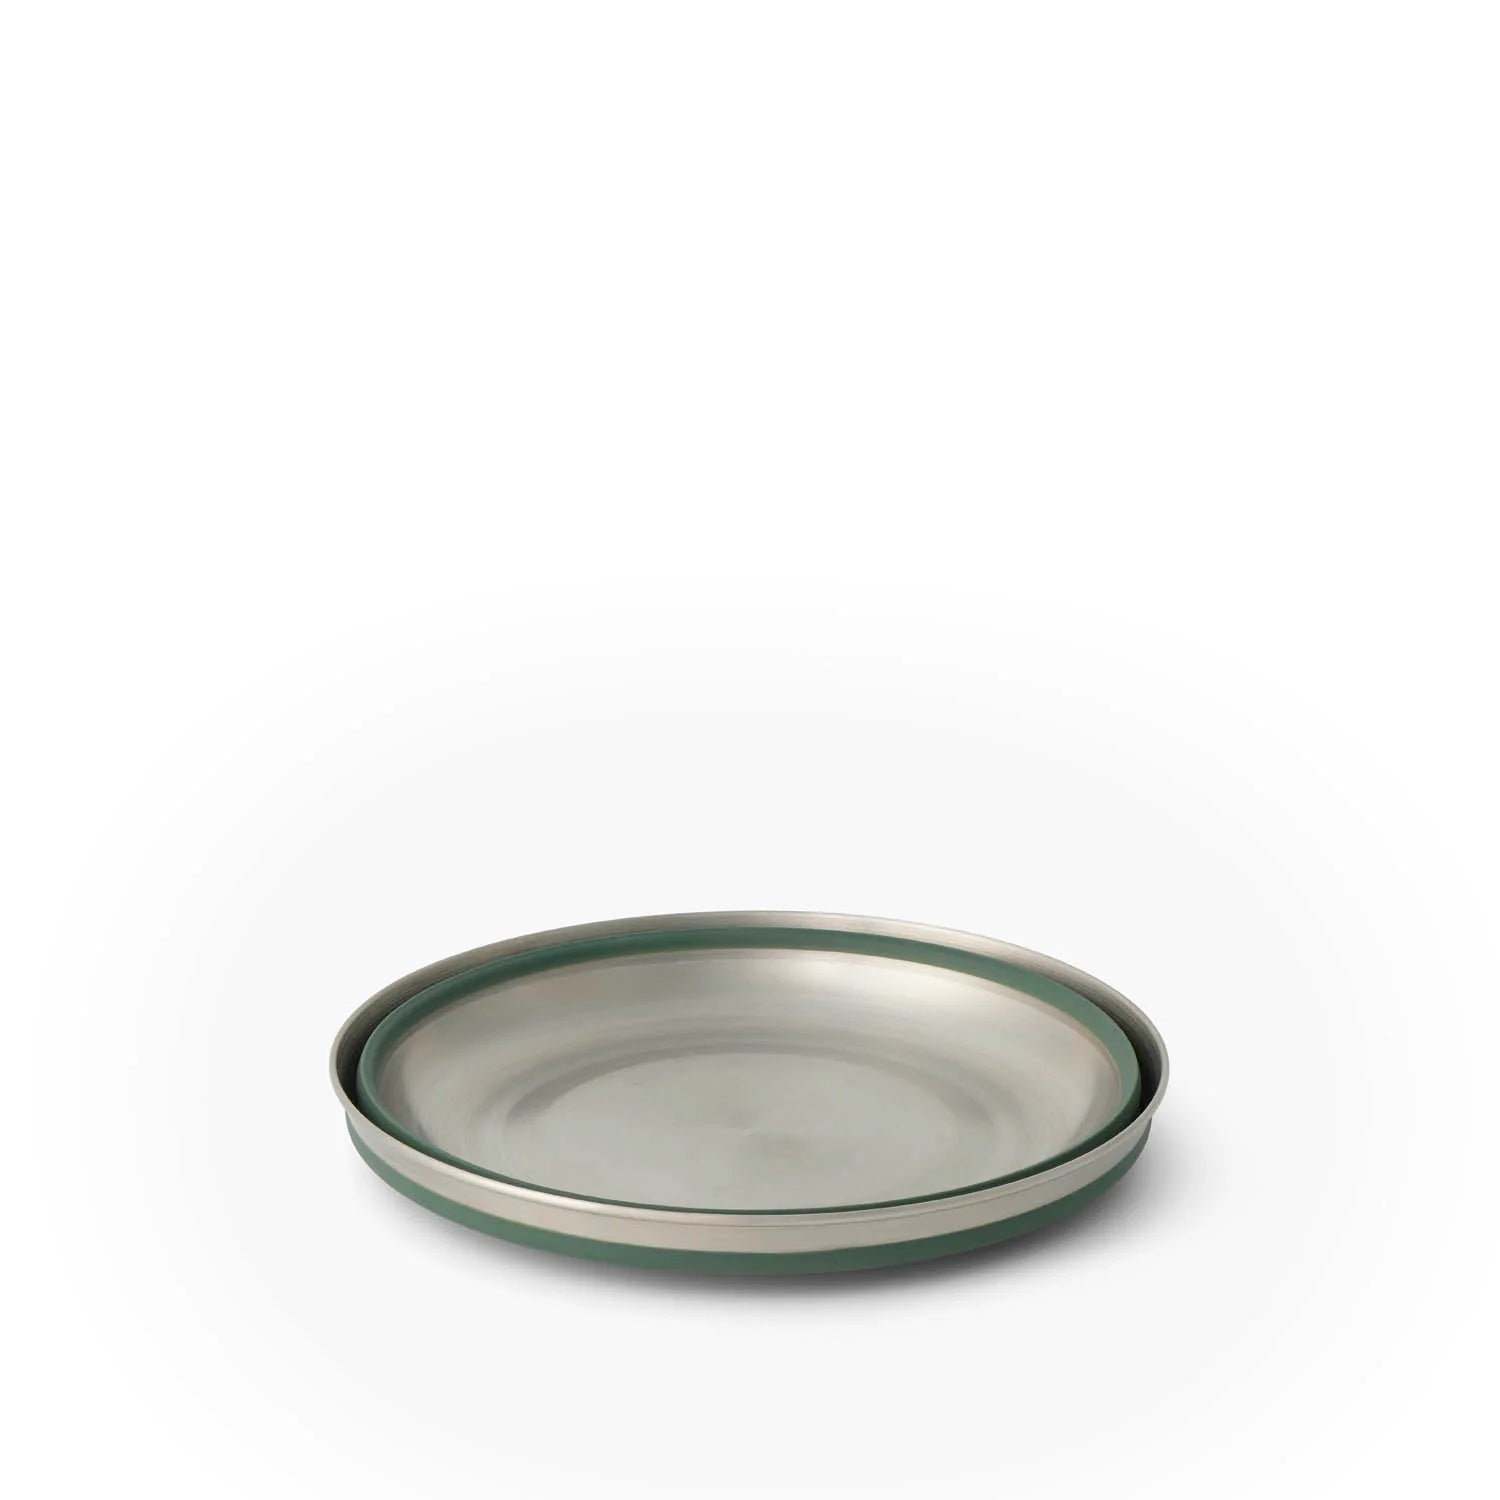 Sea to Summit Detour Stainless Steel Collapsible Bowl - Medium